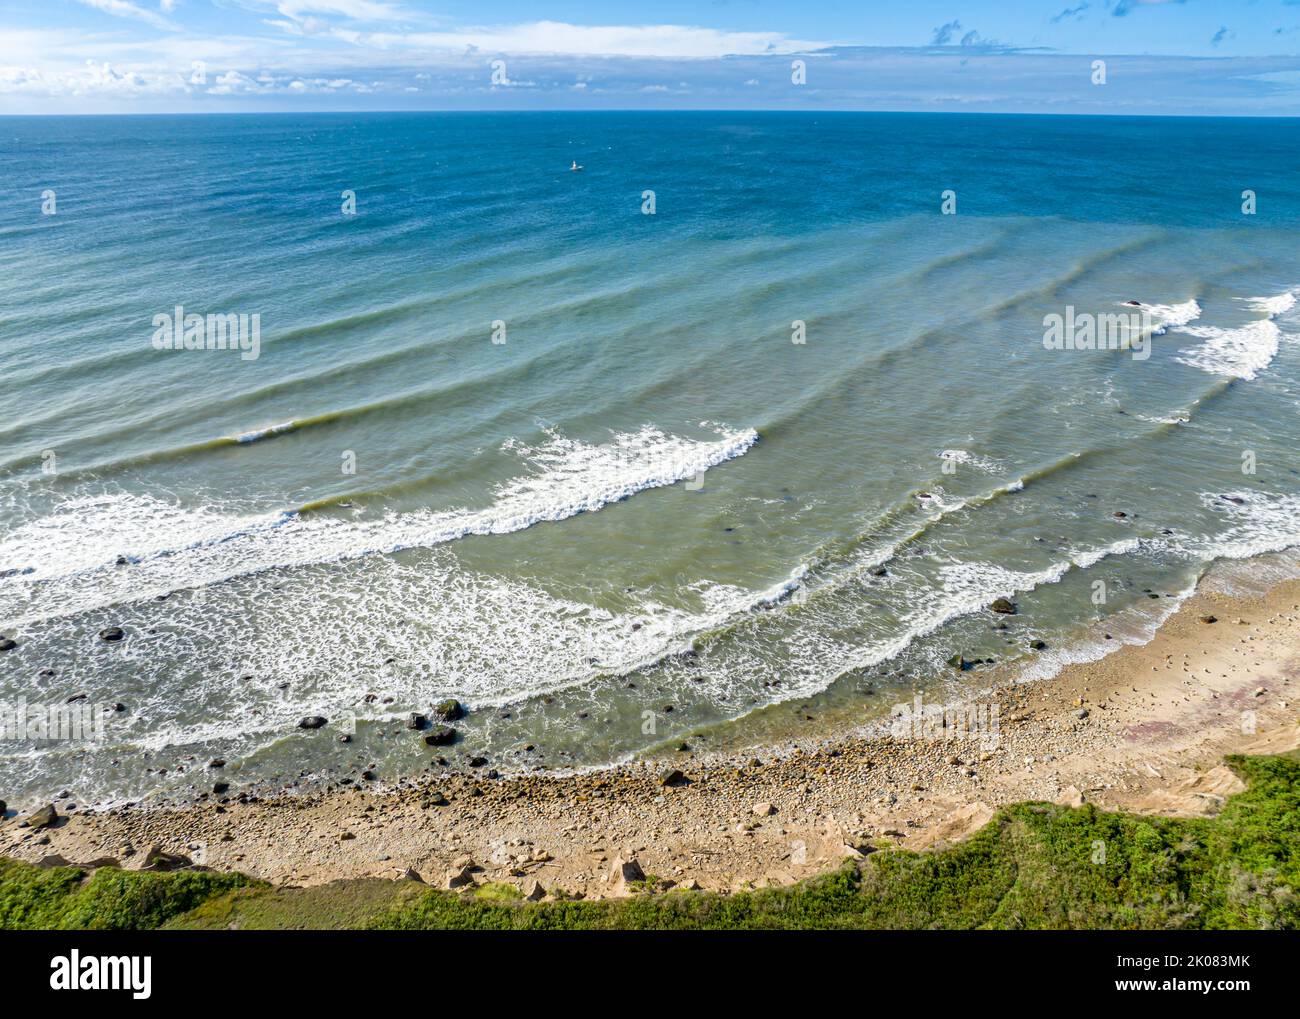 Aerial view of the rocky beach and ocean in Montauk, NY Stock Photo